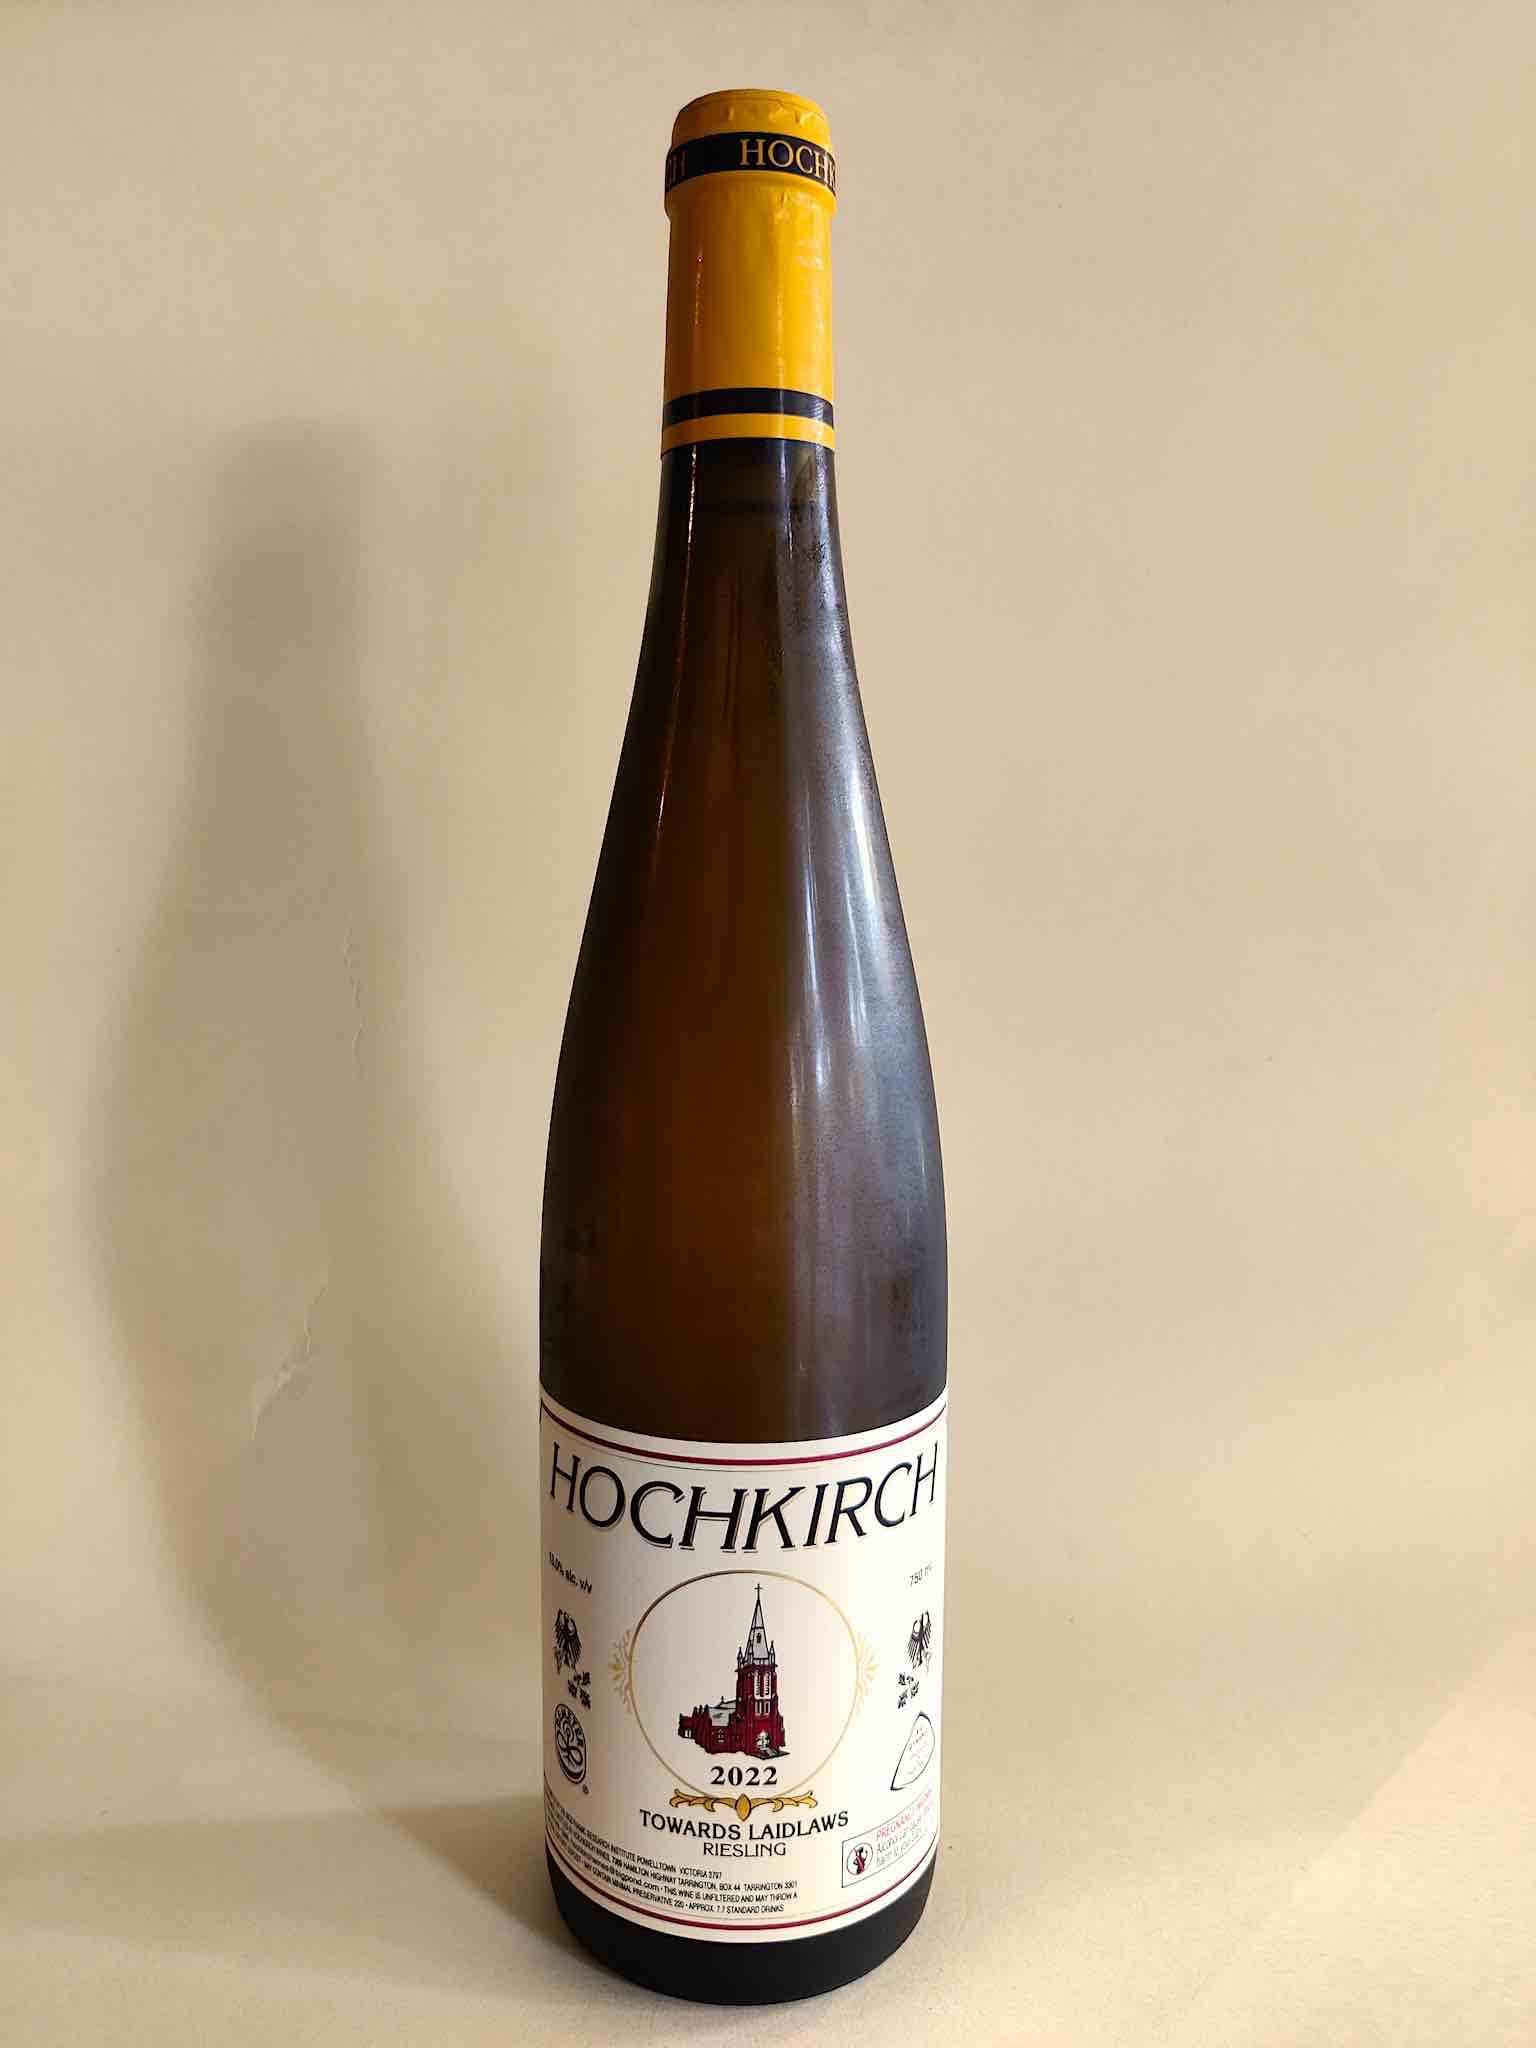 A bottle of 2022 Hochkirch Towards Laidlaws Riesling from Henty, Victoria. Biodynamic. 